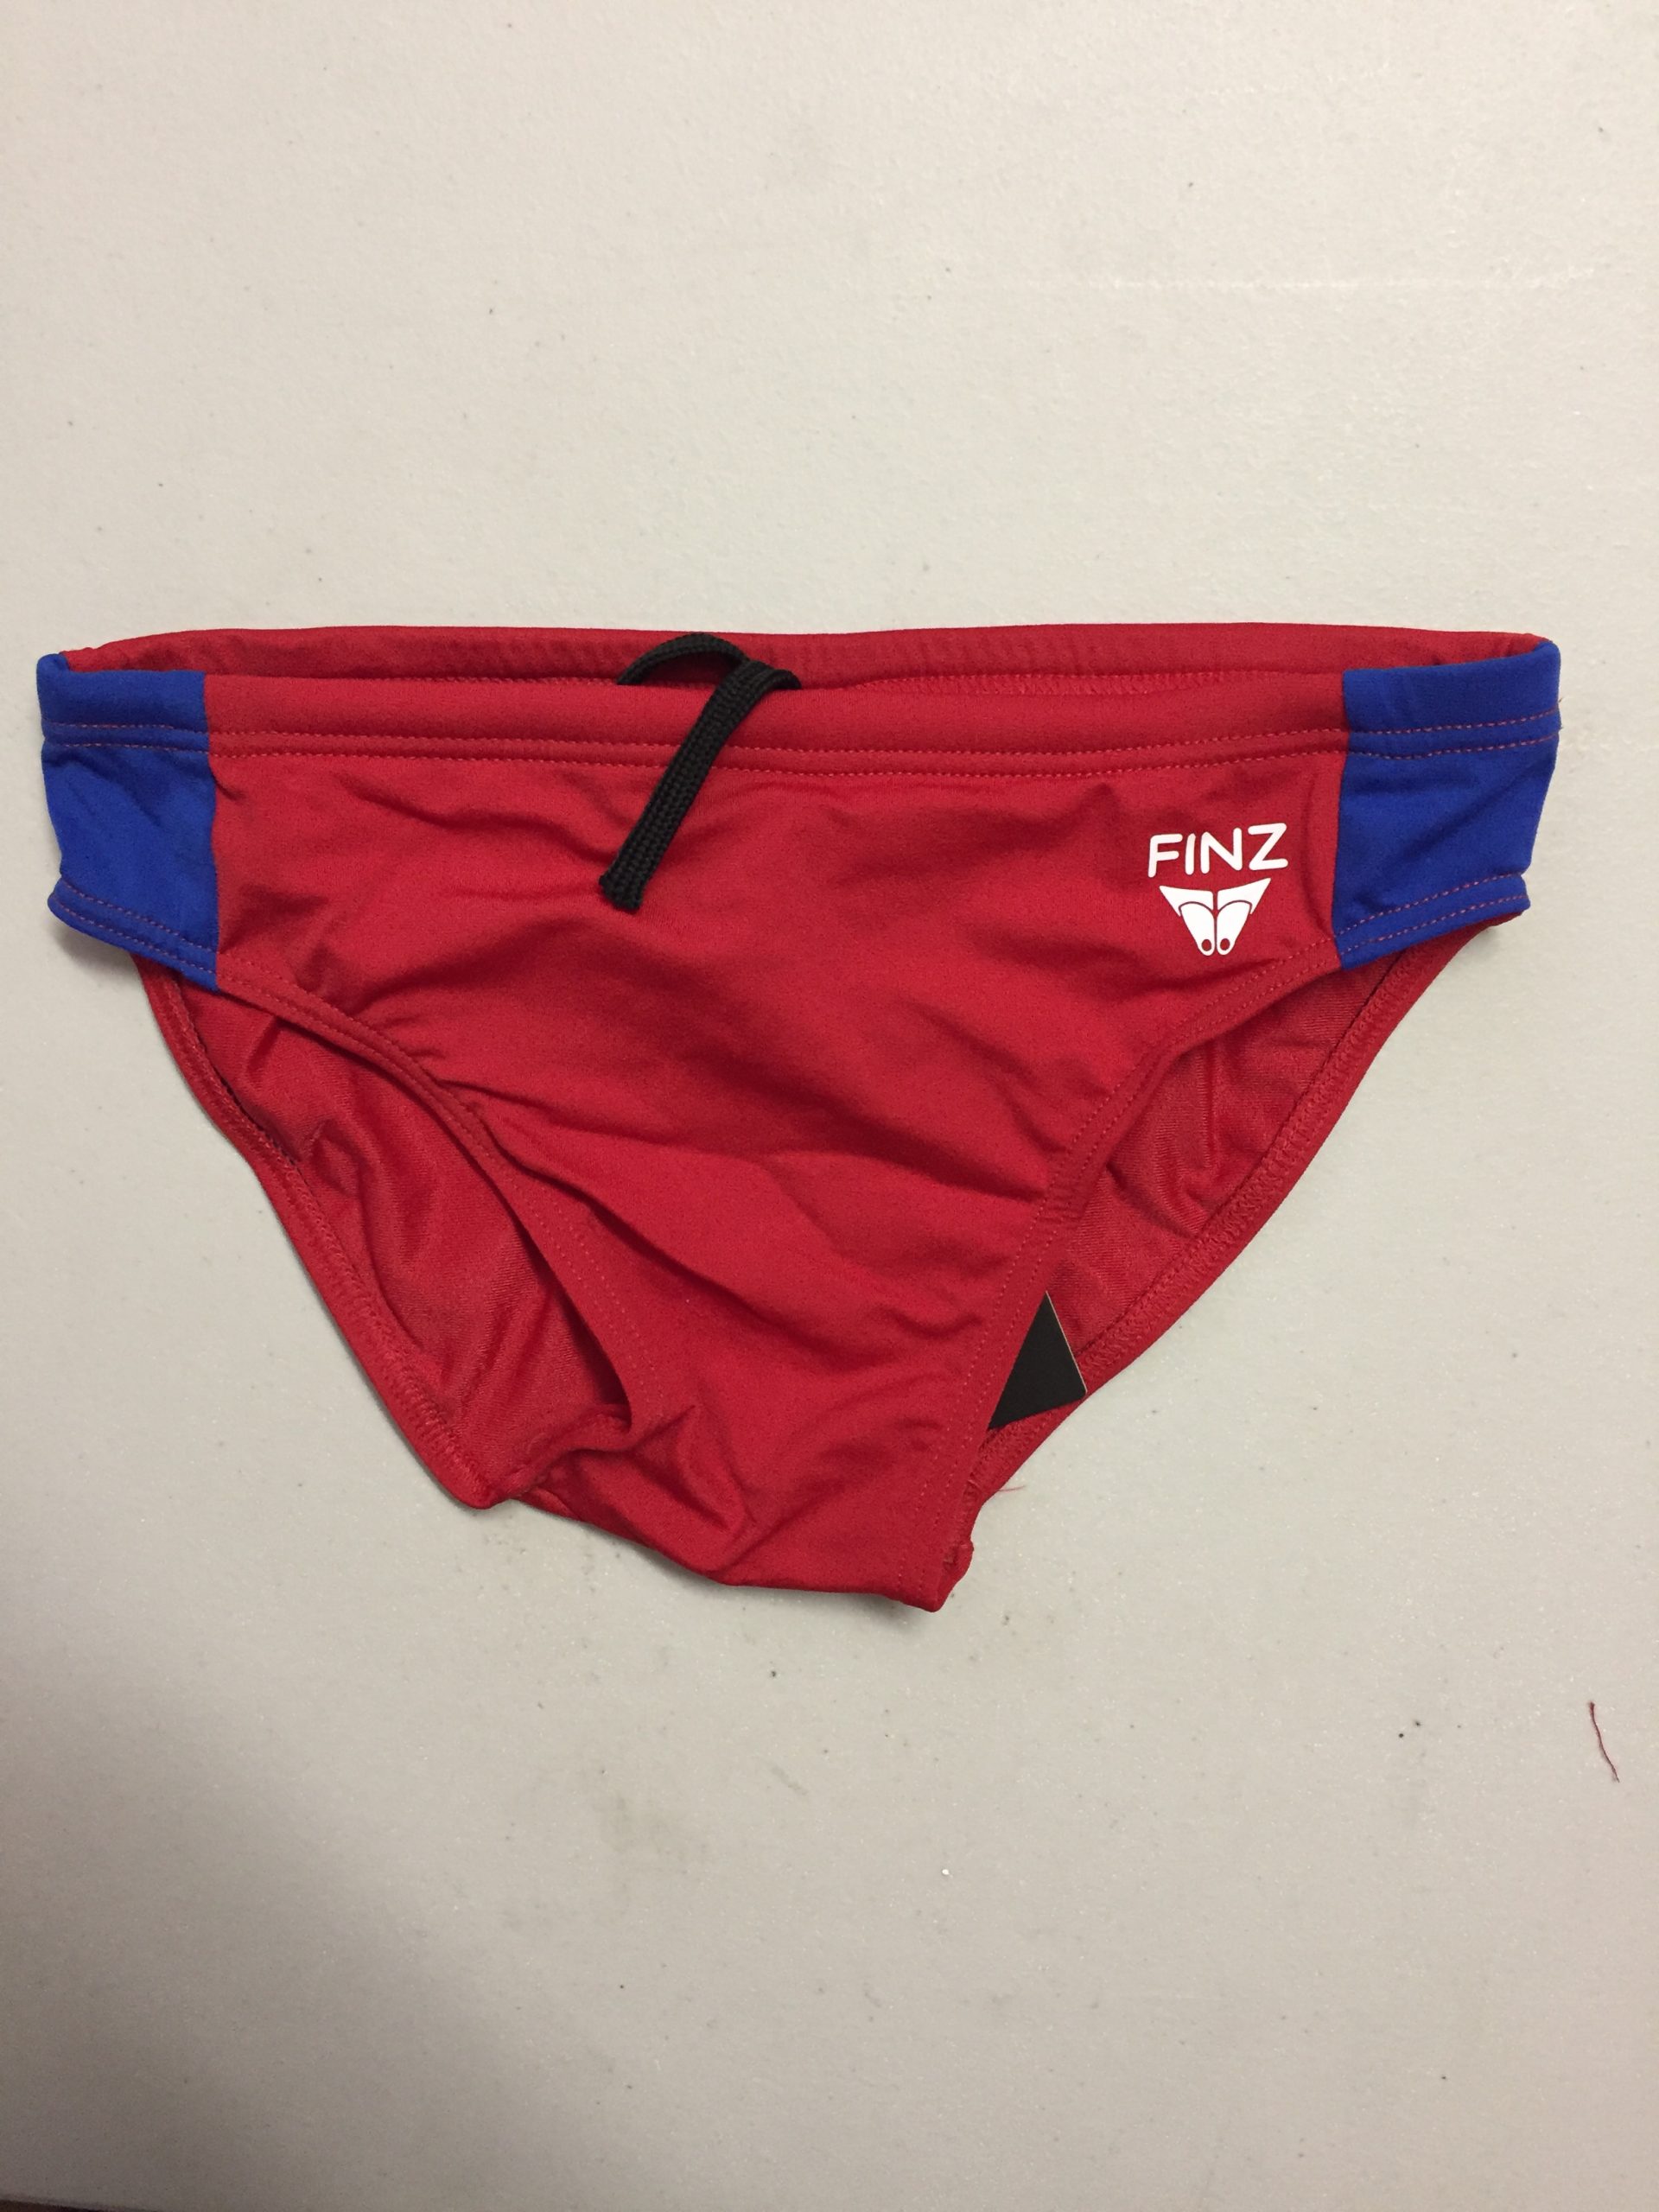 Boys – Swimmers ON SALE – Queenscliff Surf Life Saving Club